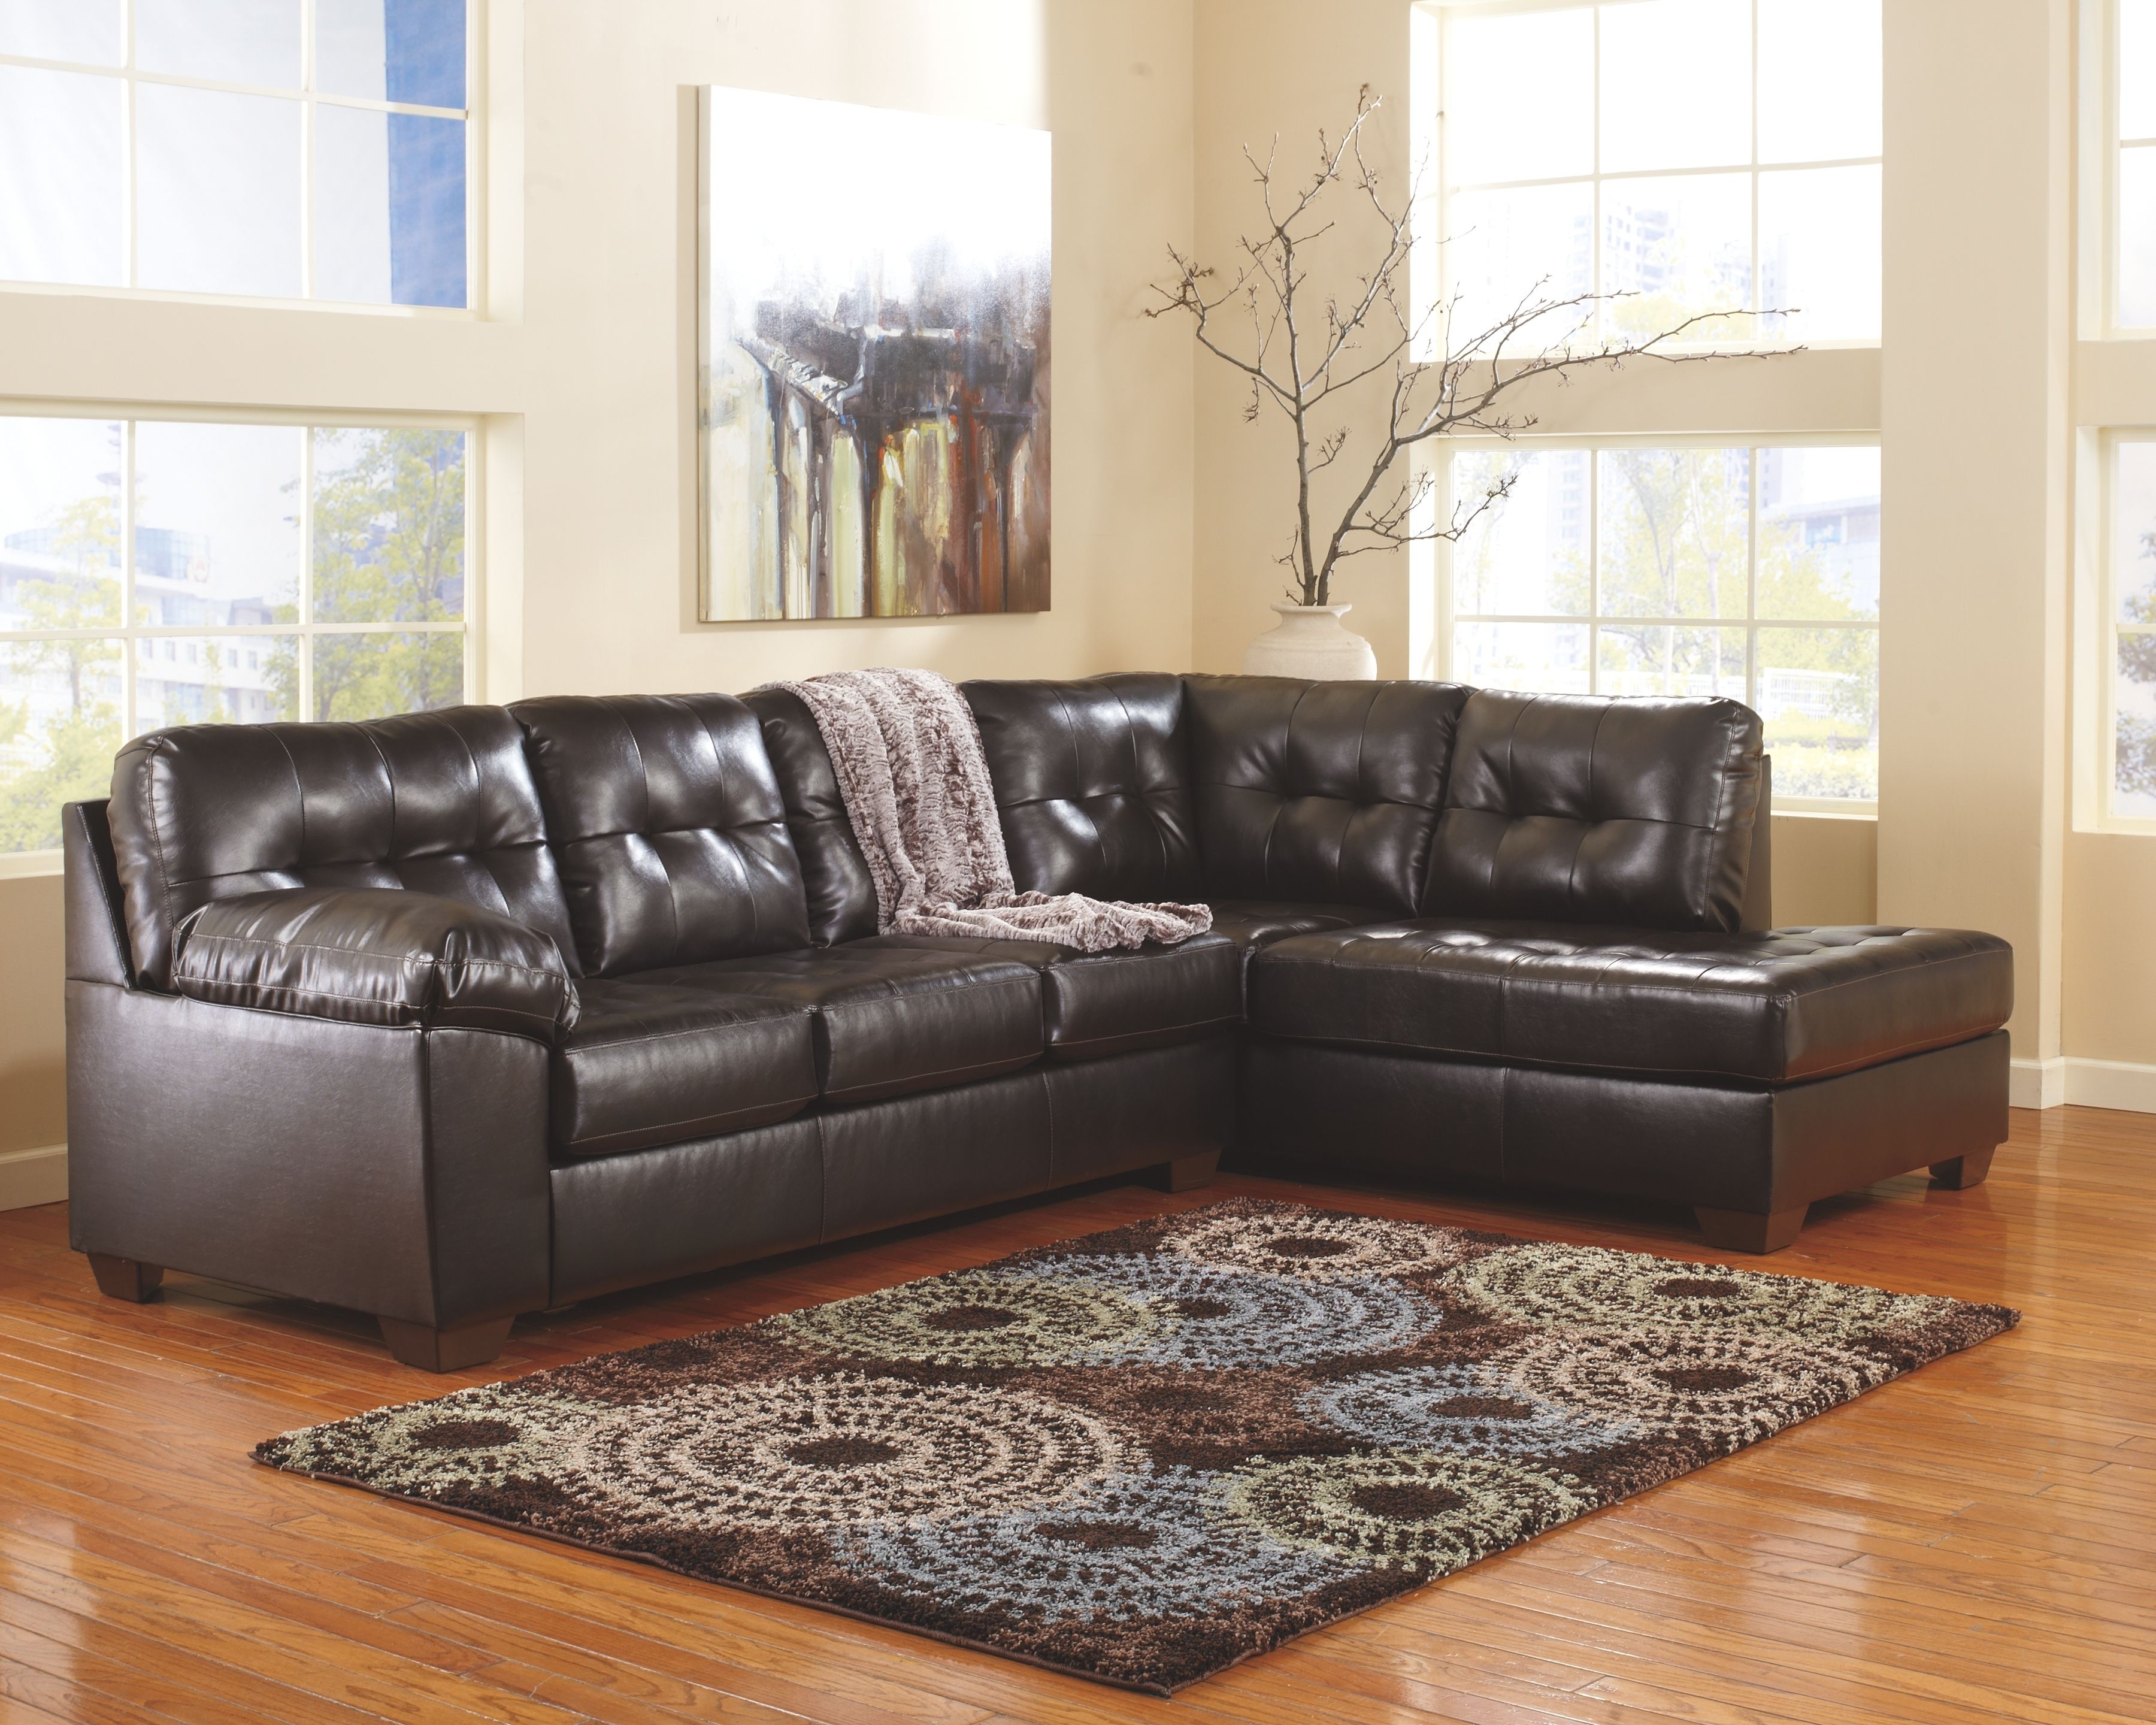 Alliston 2 Piece Sectional, Chocolate | Products | Pinterest | Products Intended For Marissa Ii 3 Piece Sectionals (View 11 of 30)